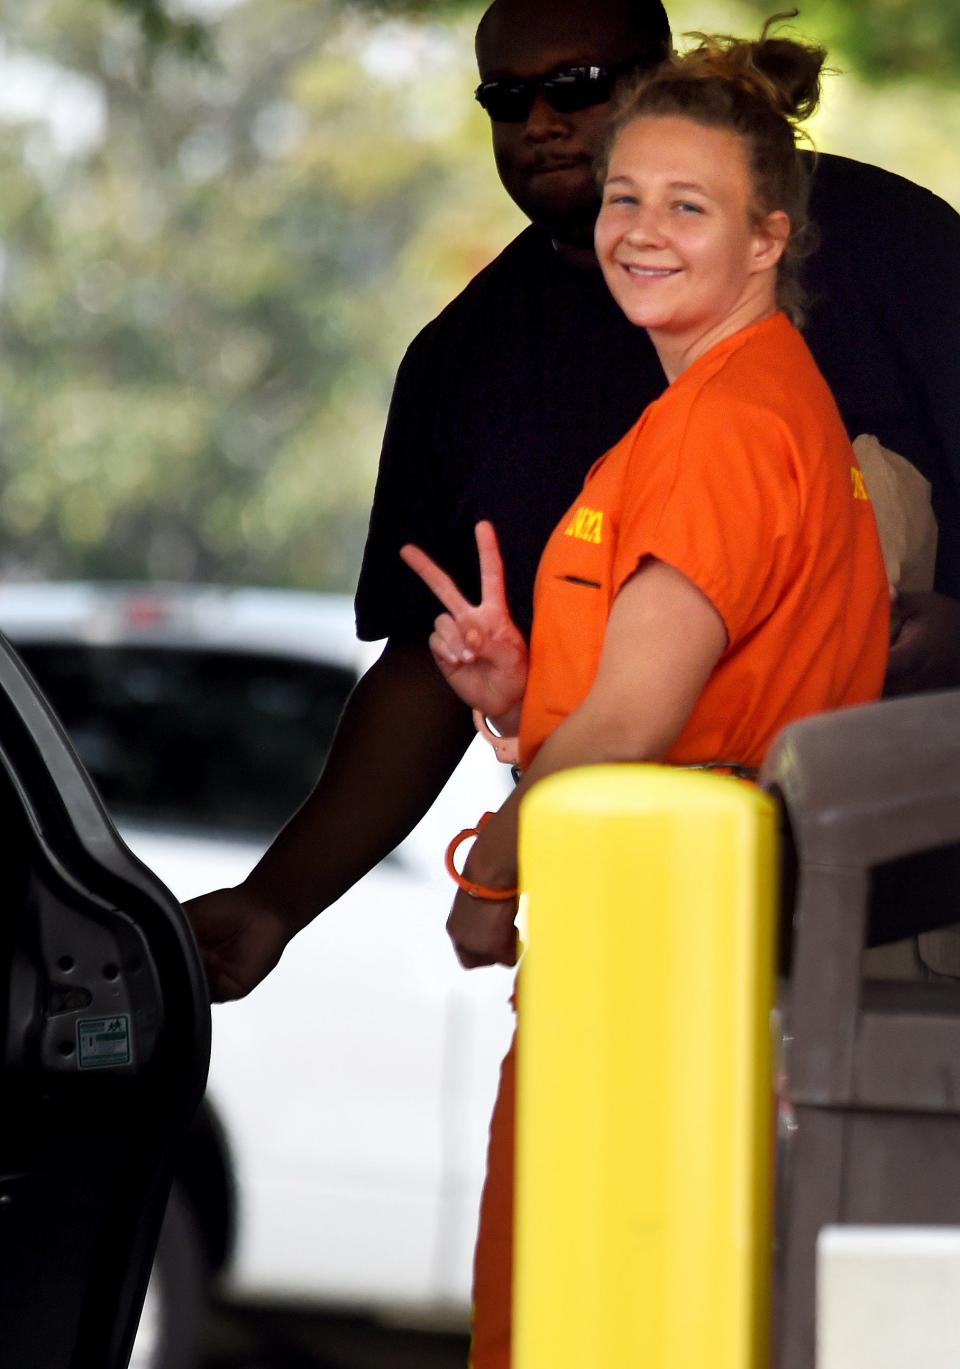 Reality Winner, who pleaded guilty to mailing a classified U.S. report to a news organization, walks out of a courthouse in Augusta, Georgia, in 2018 after being sentenced to more than five years in prison.